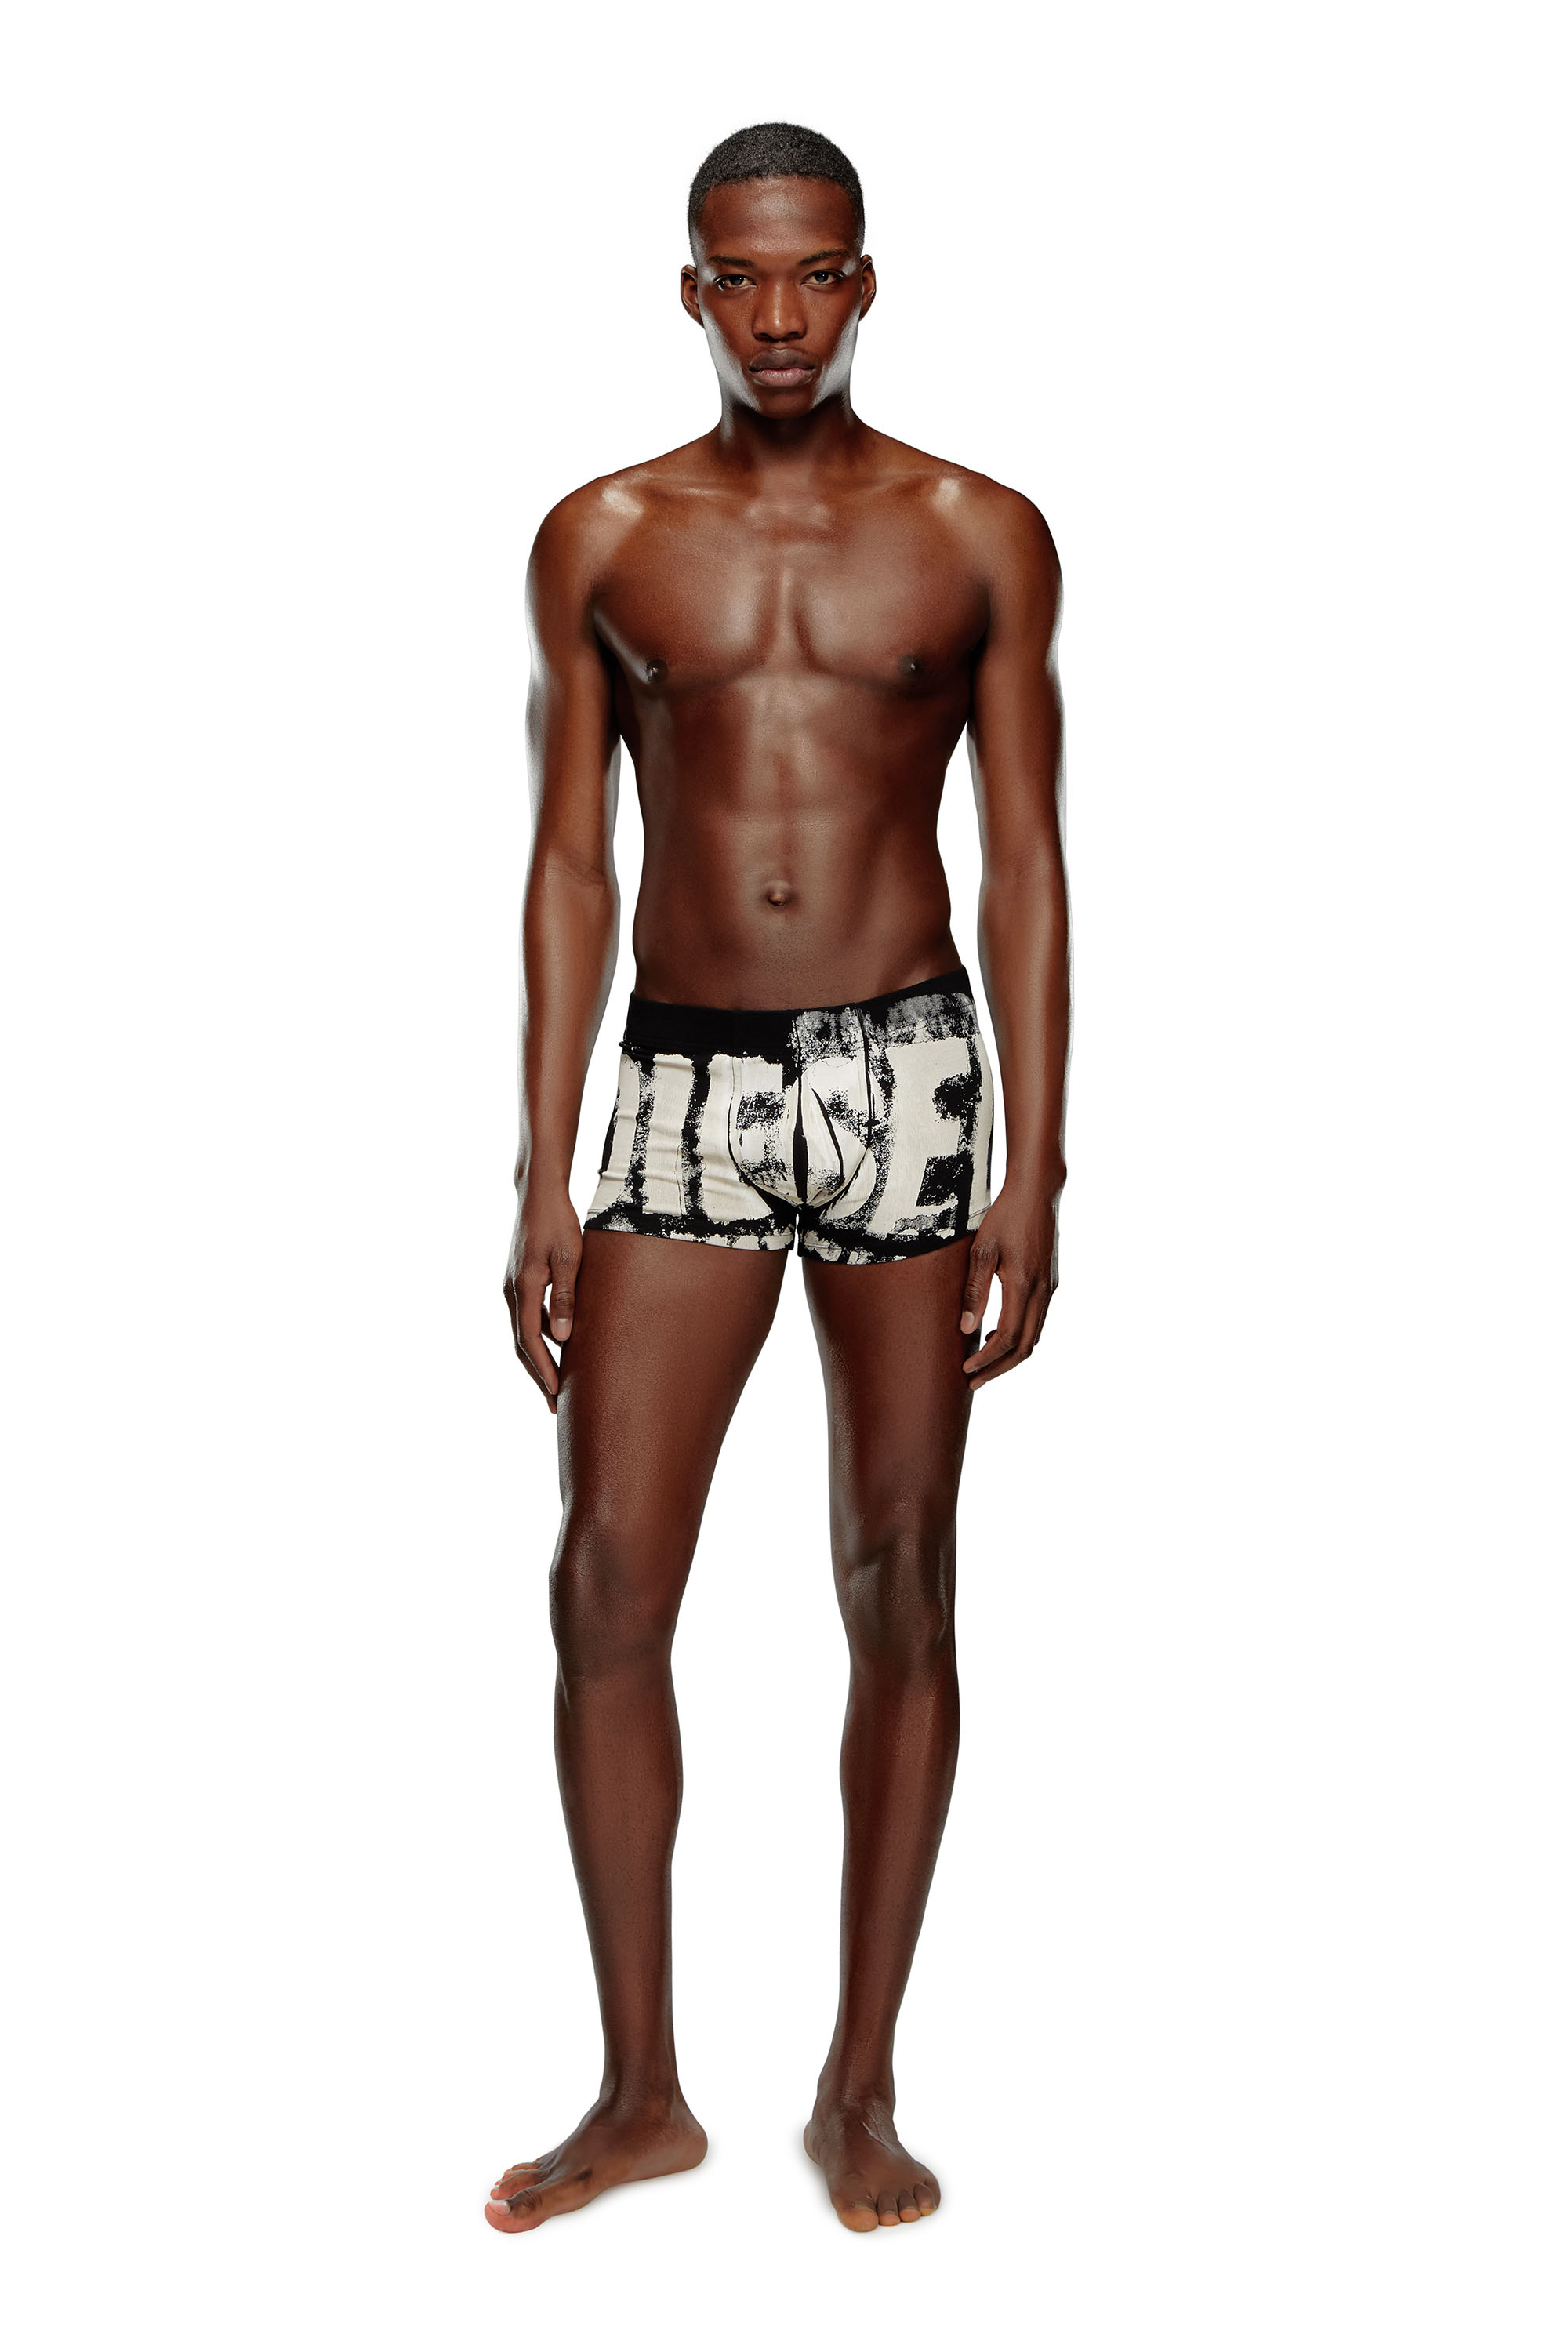 Buy 5-pack boxer shorts online in Kuwait